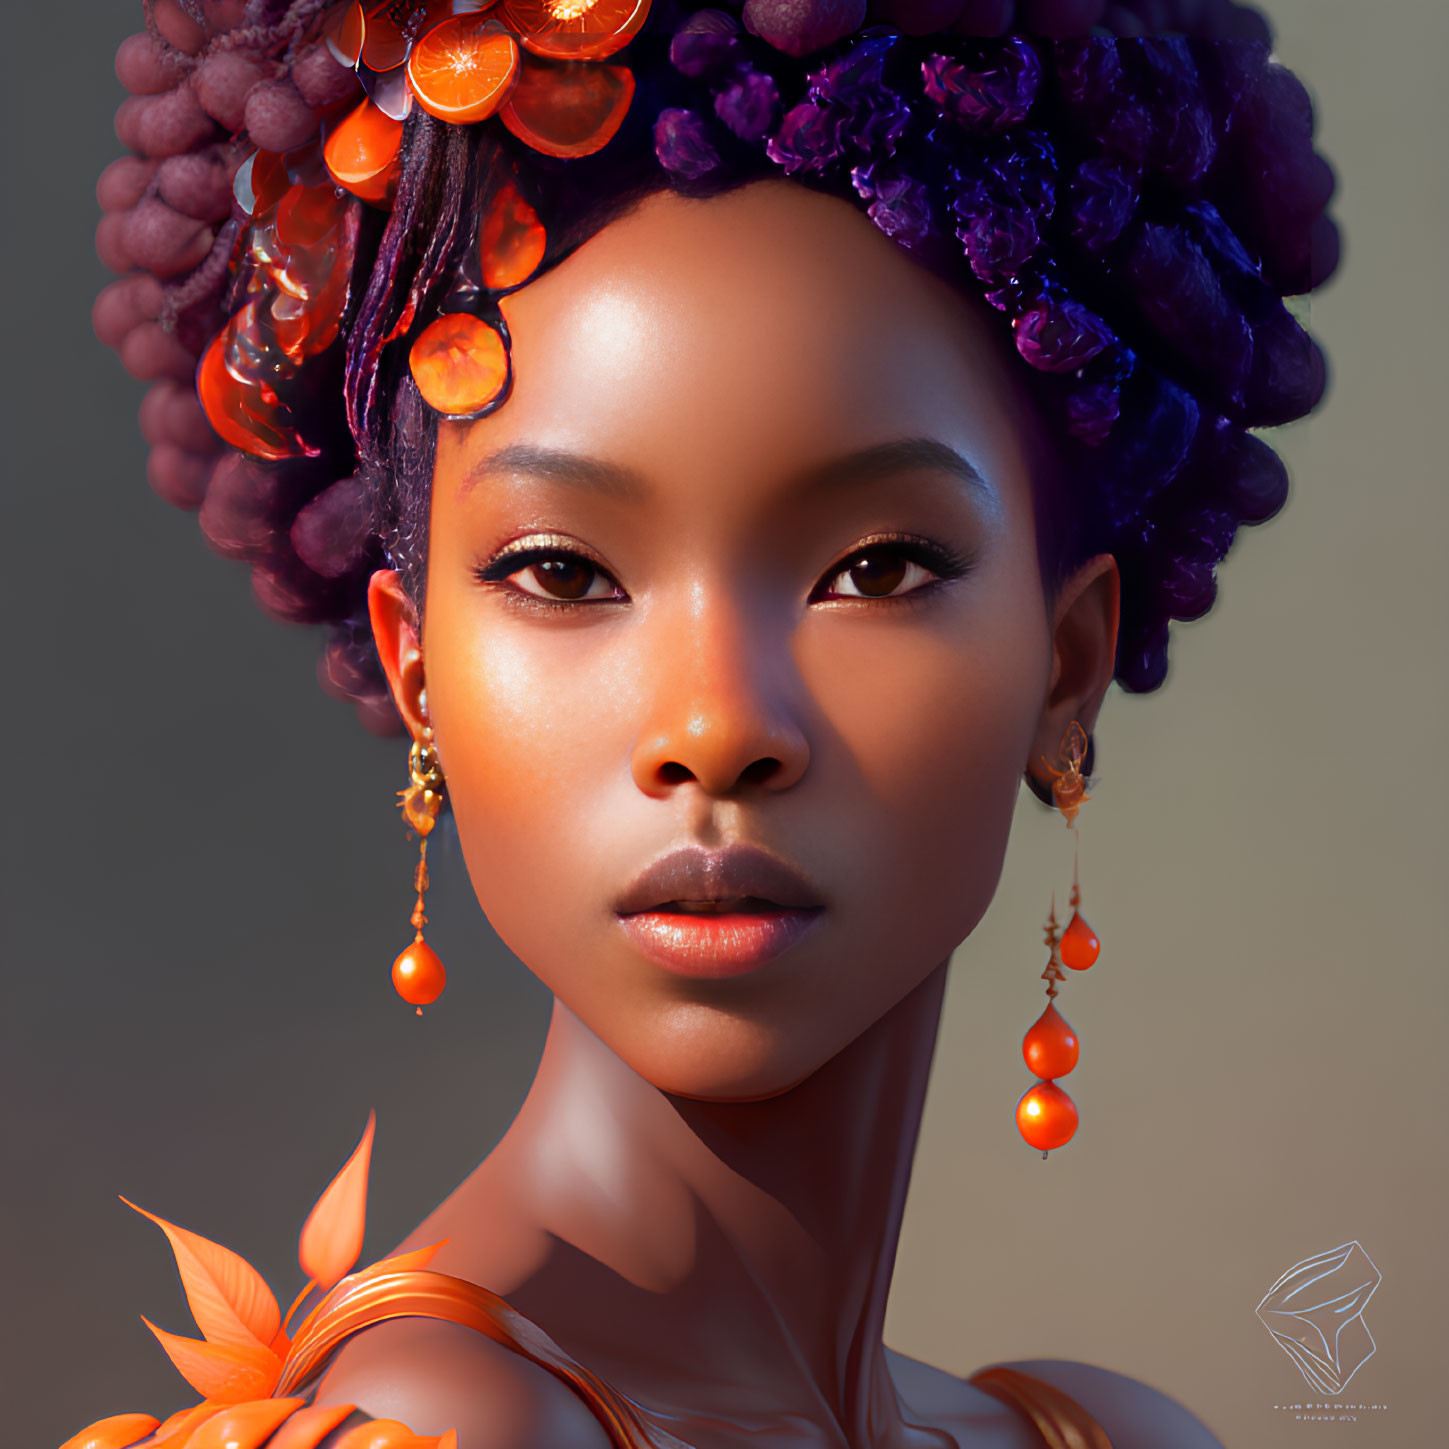 Digital artwork features woman with fruit-adorned hairstyle and citrus accessories against neutral backdrop